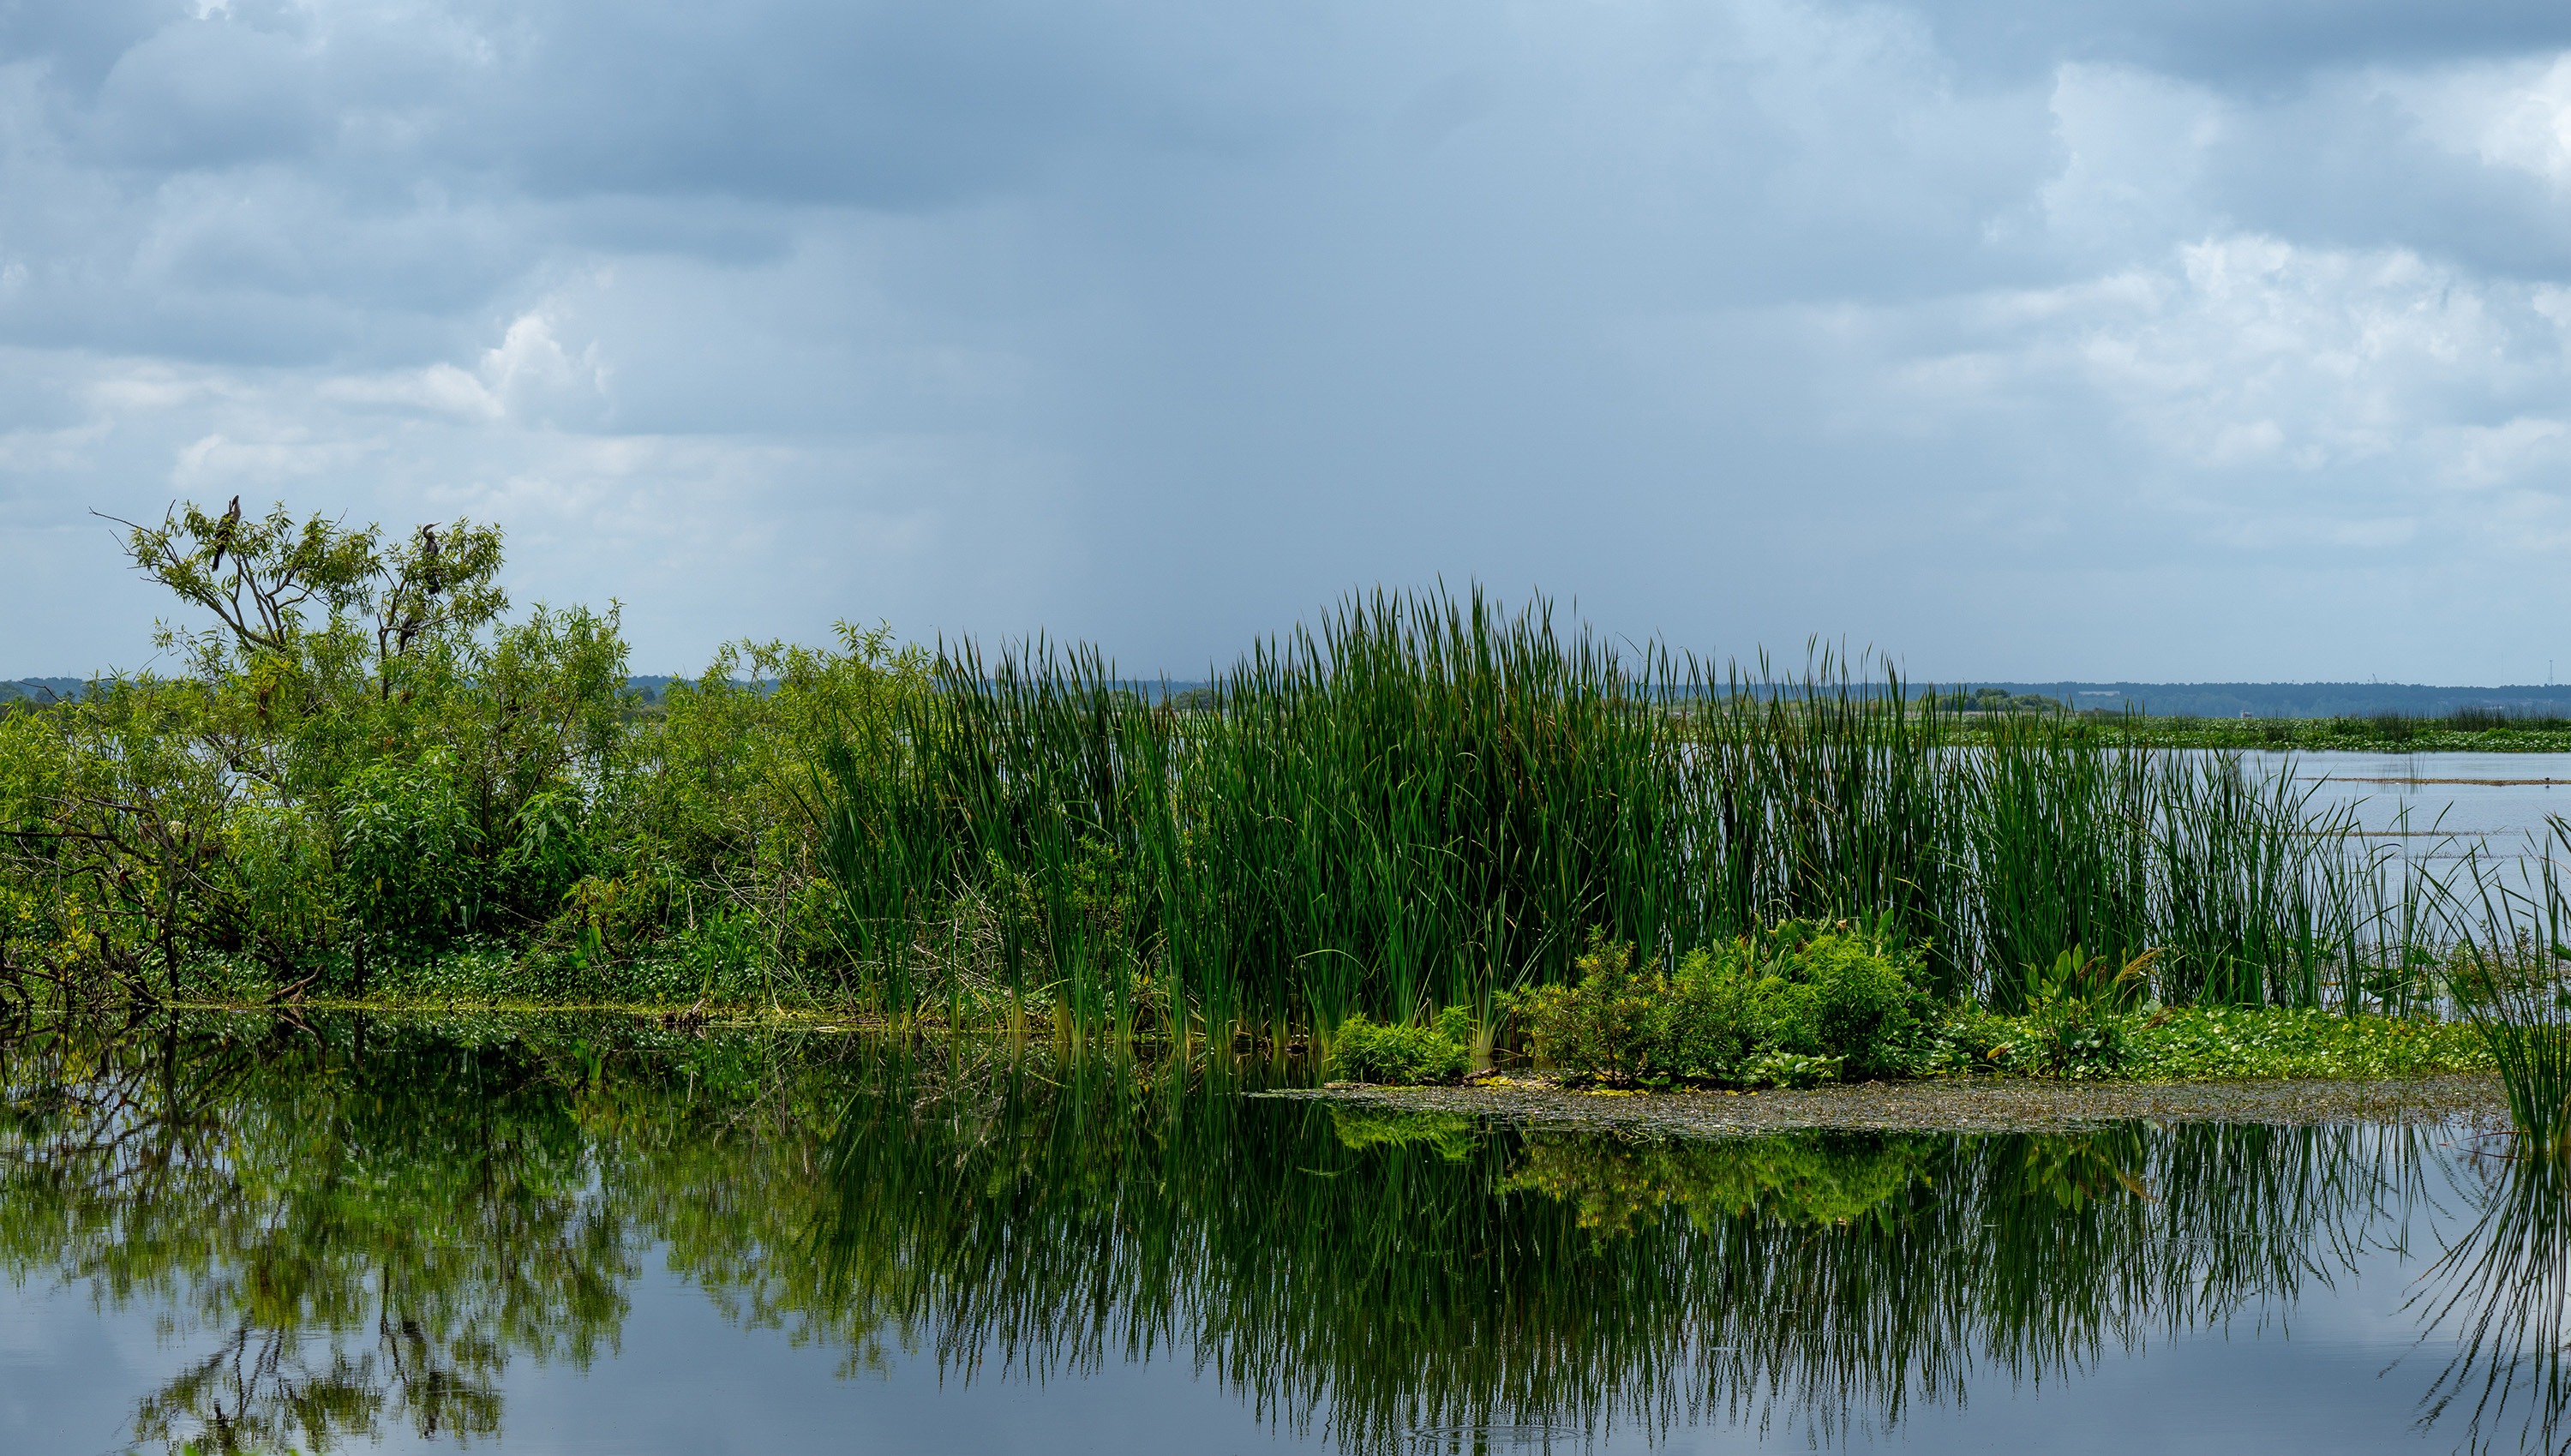 Lake Apopka wetlands mirroring the sky and water plants